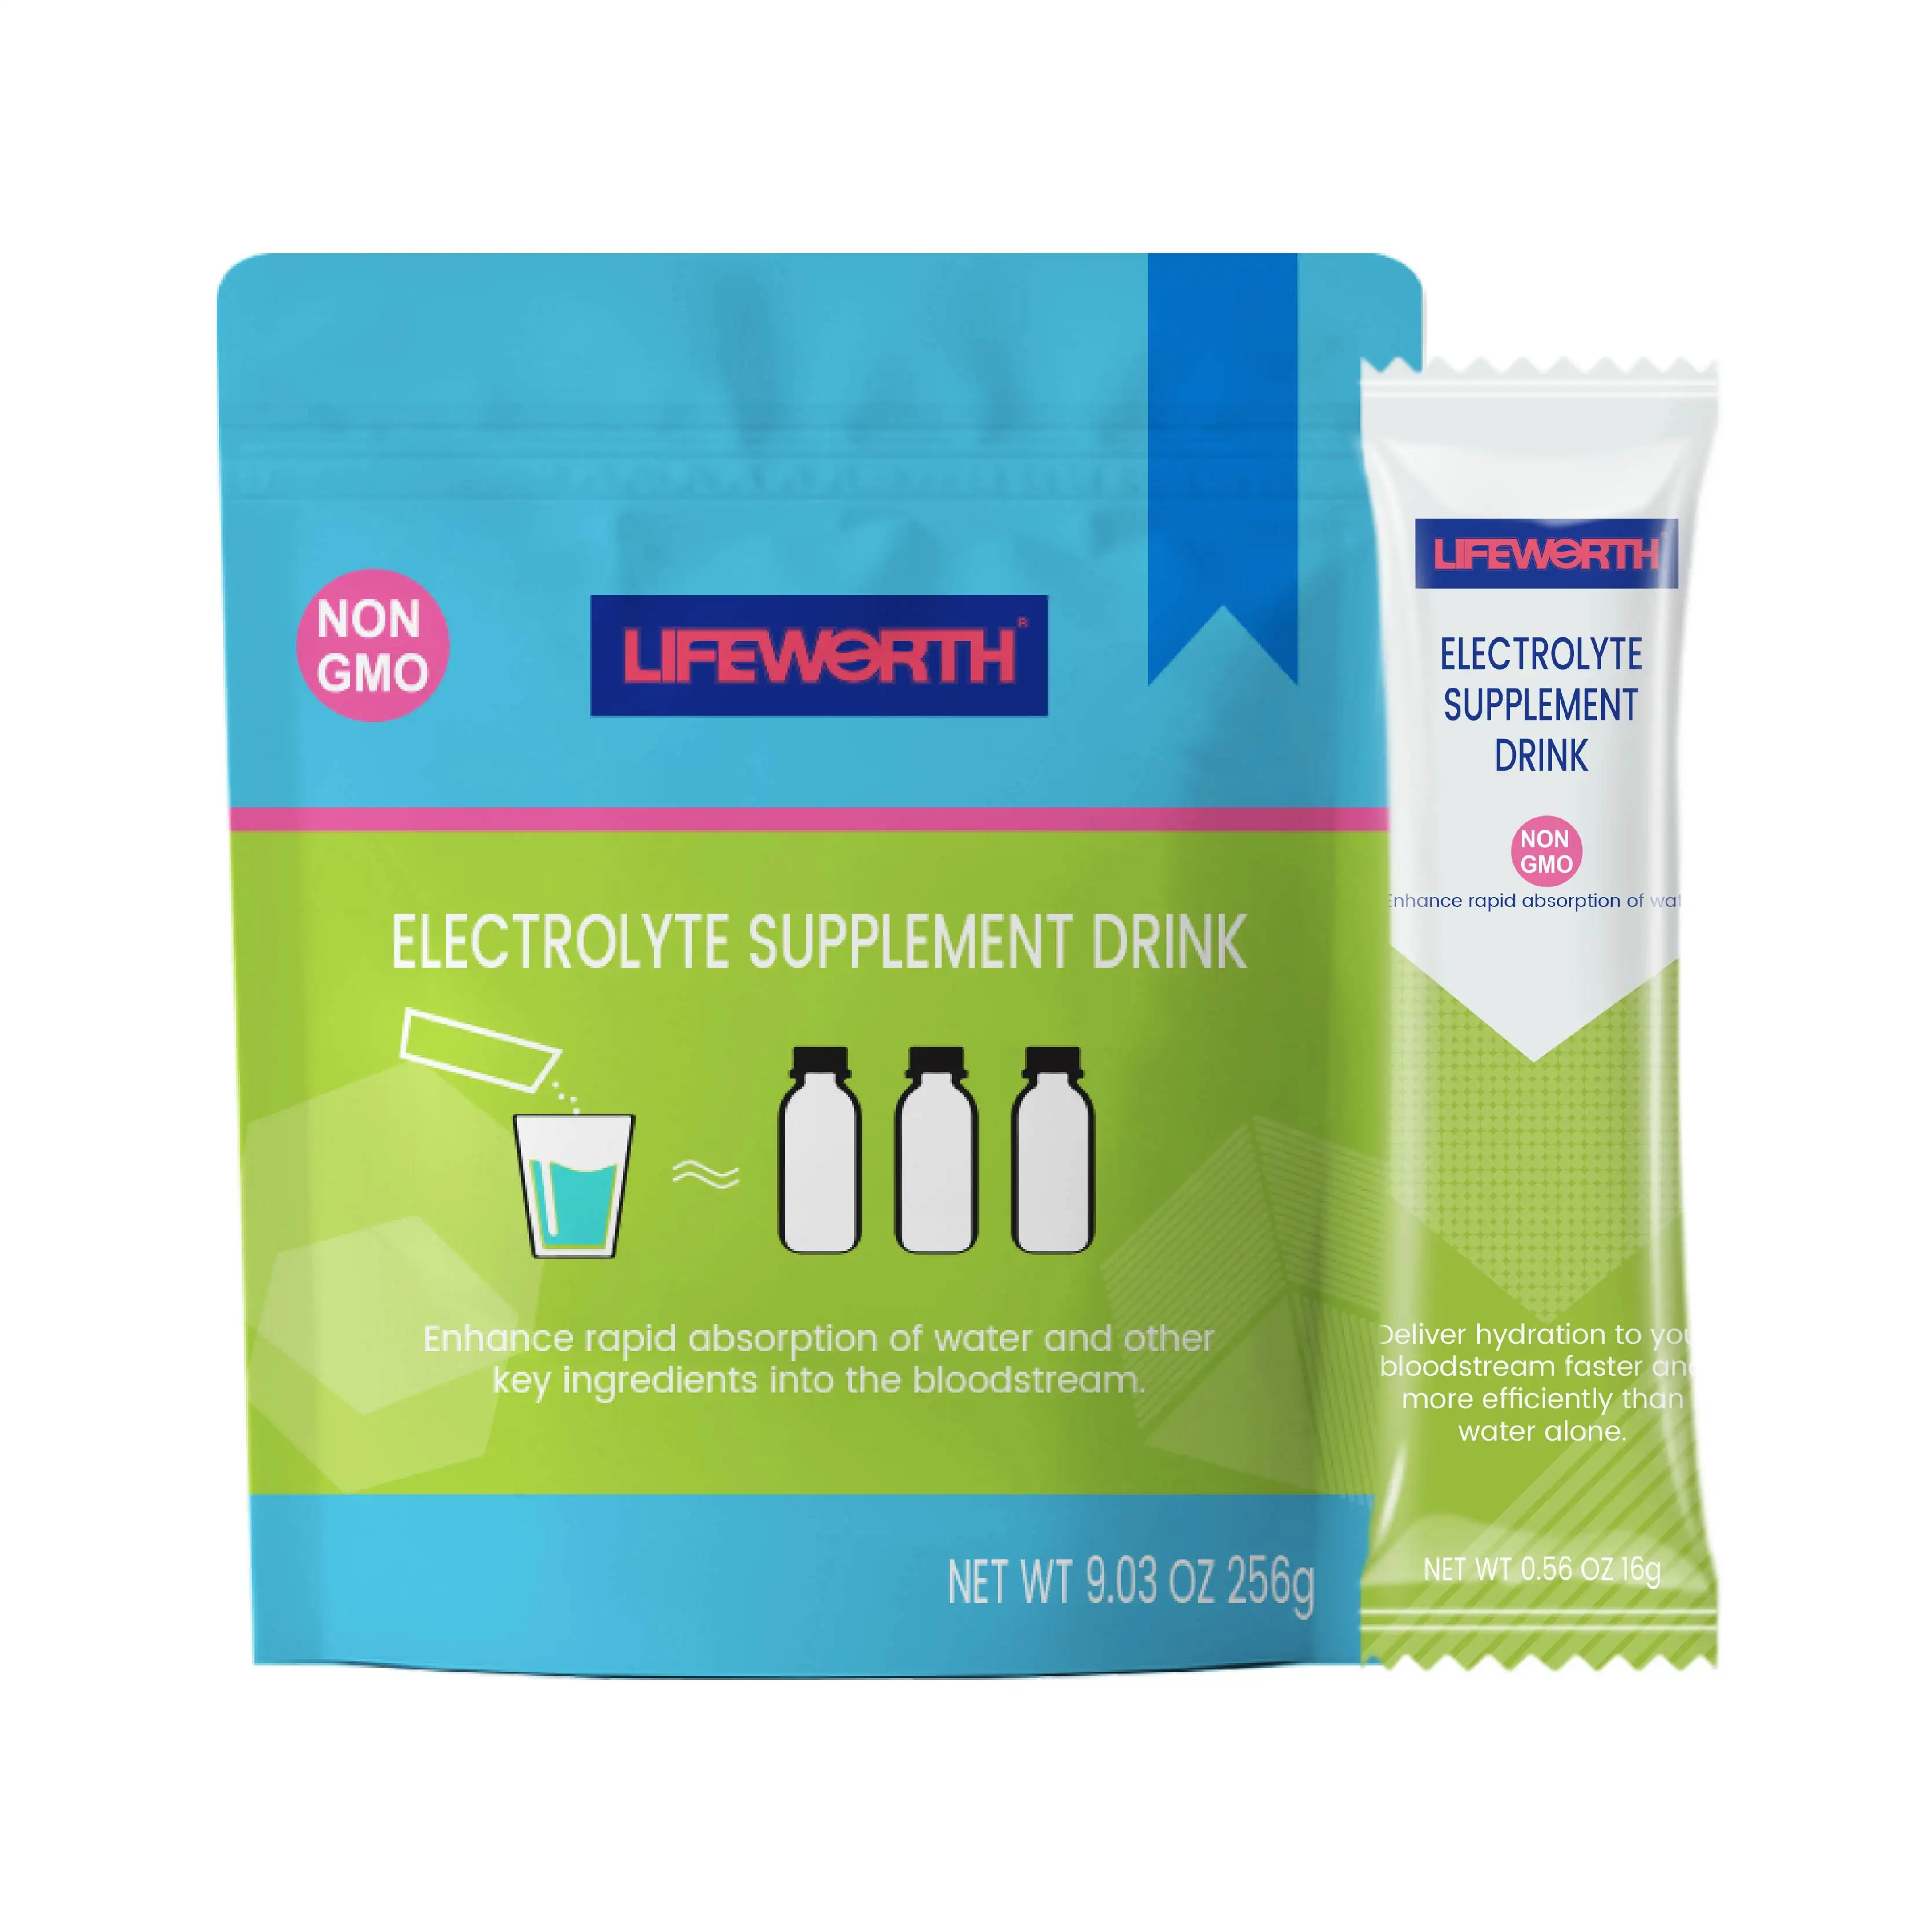 LIFEWORTH private label electrolyte microelement supplement natural energy drink post workout